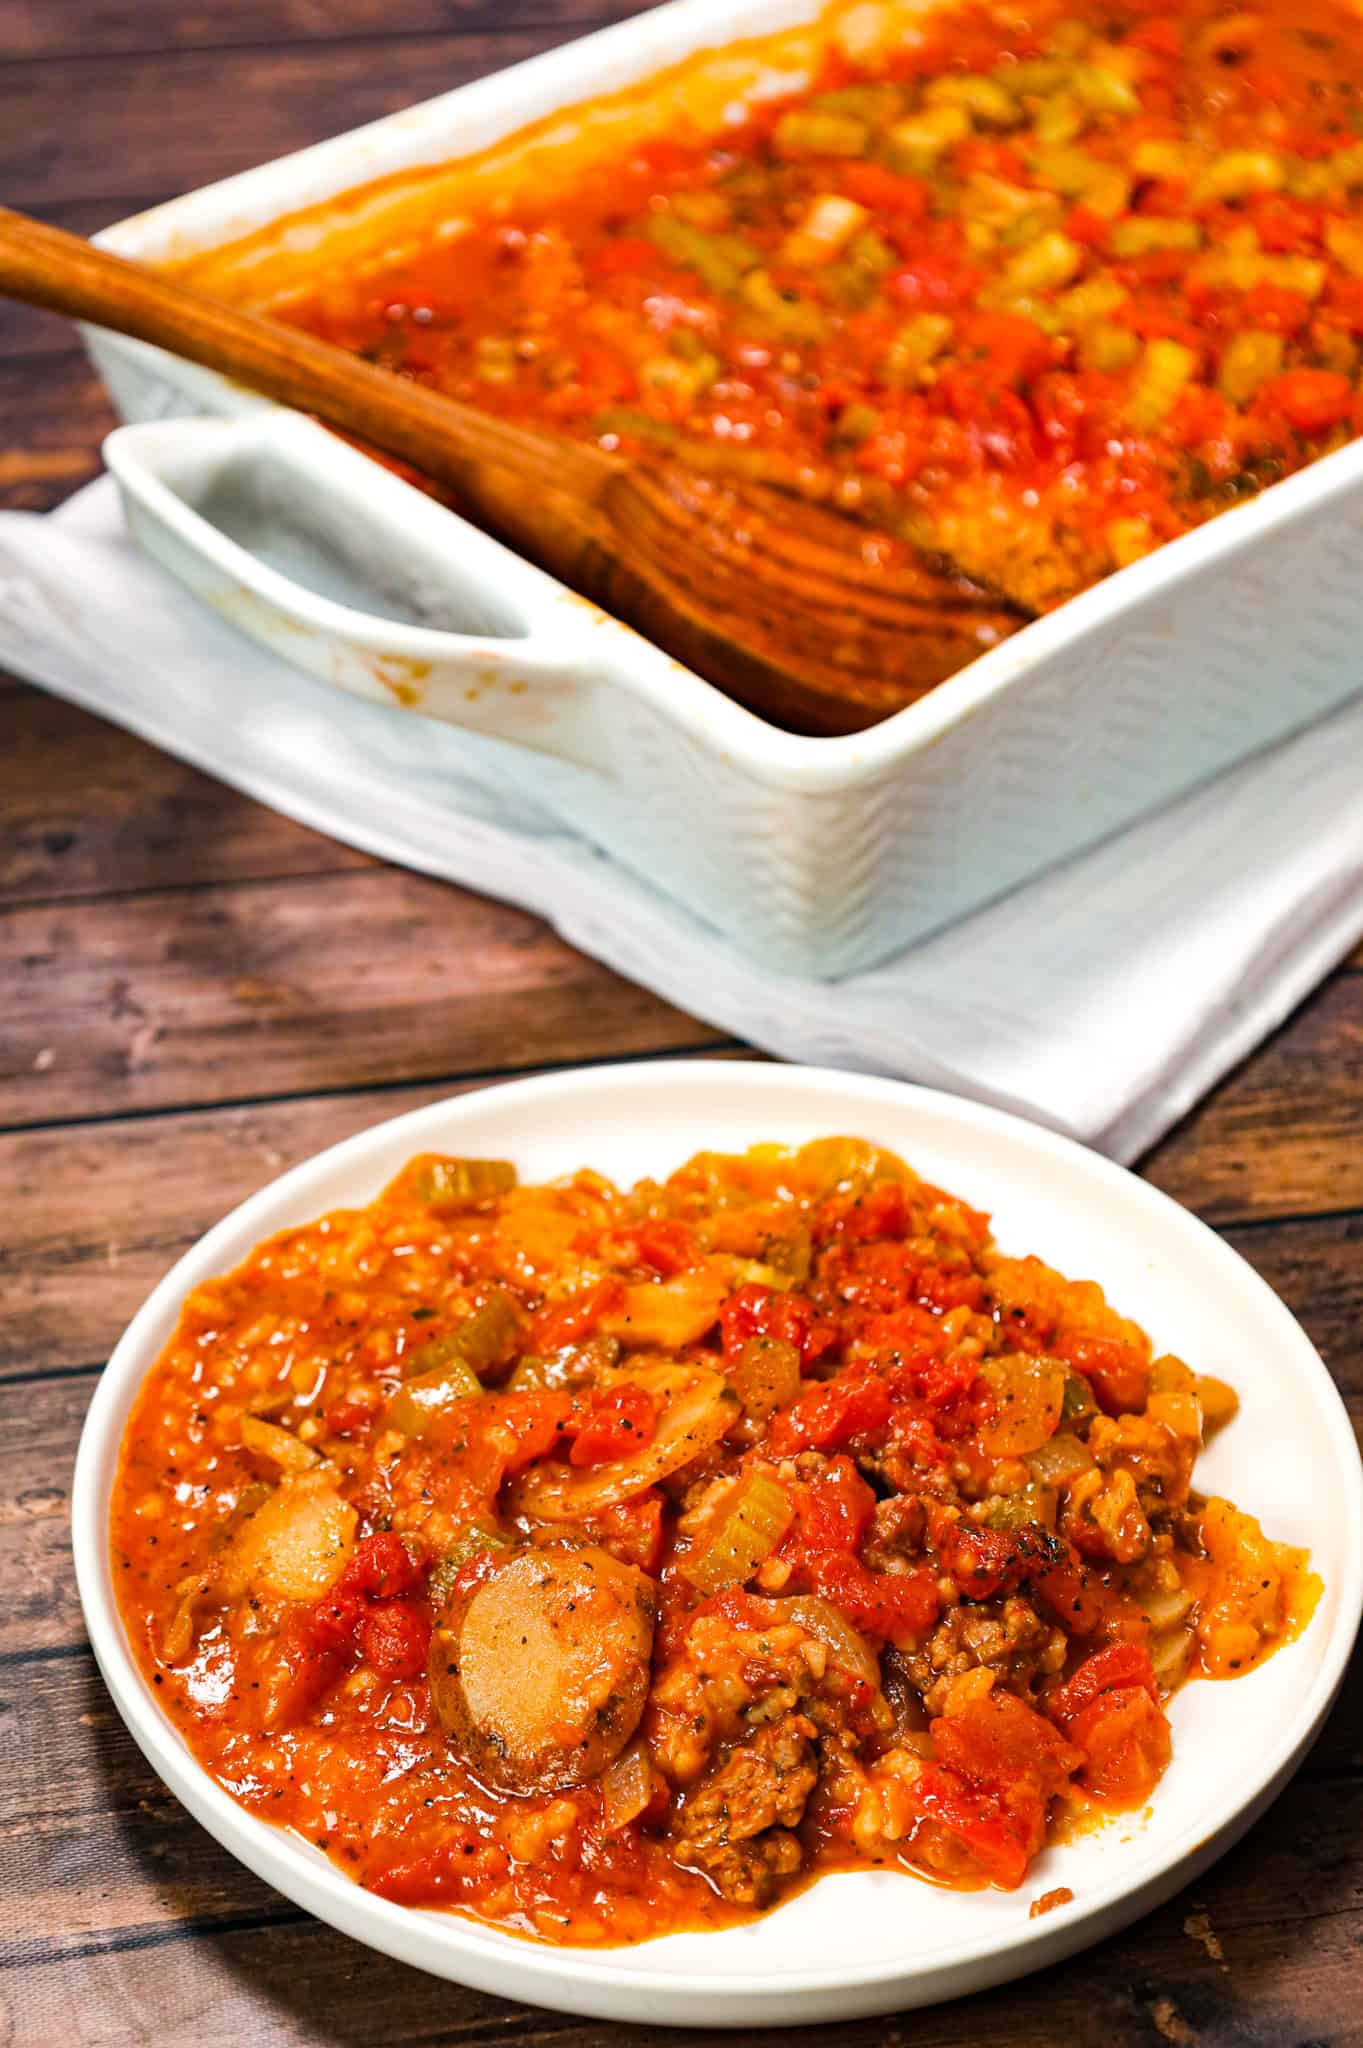 Shipwreck Casserole is a hearty ground beef casserole loaded with sliced potatoes, long grain rice, diced tomatoes, celery and tomato soup.